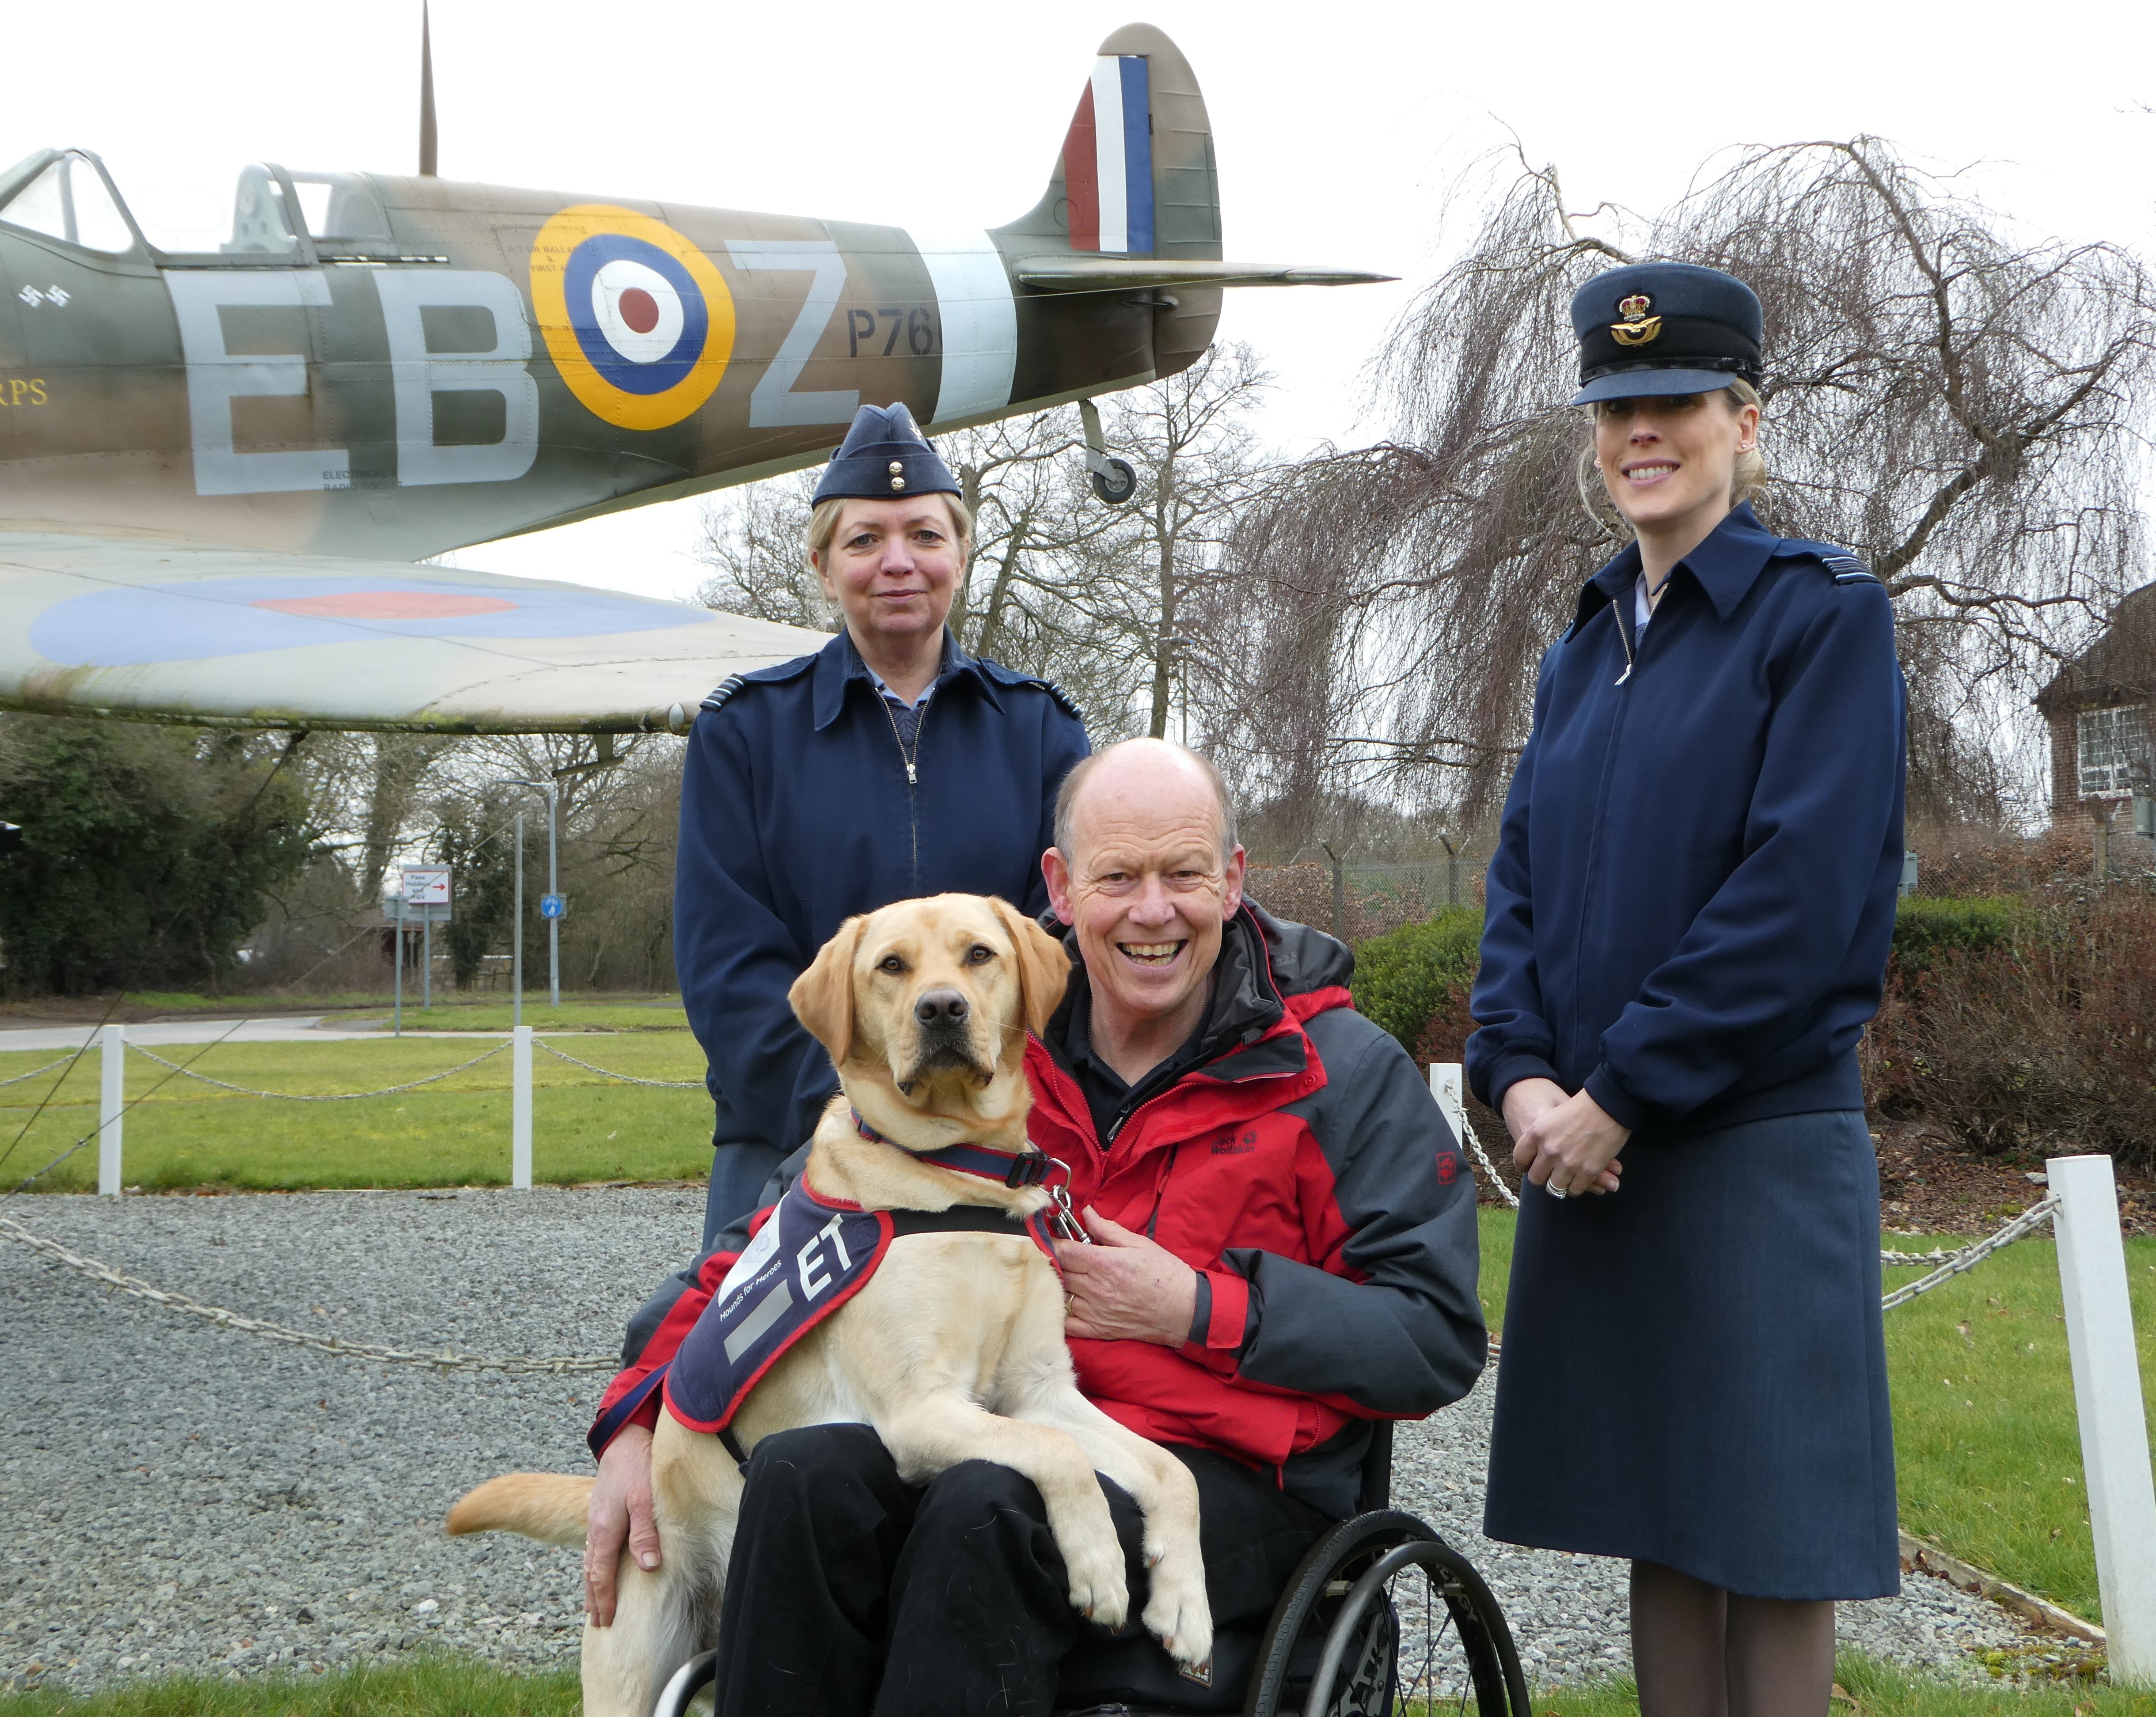 Image shows RAF Personnel and veteran with Assistant Dog in front of guardian gate Spitfire model. 